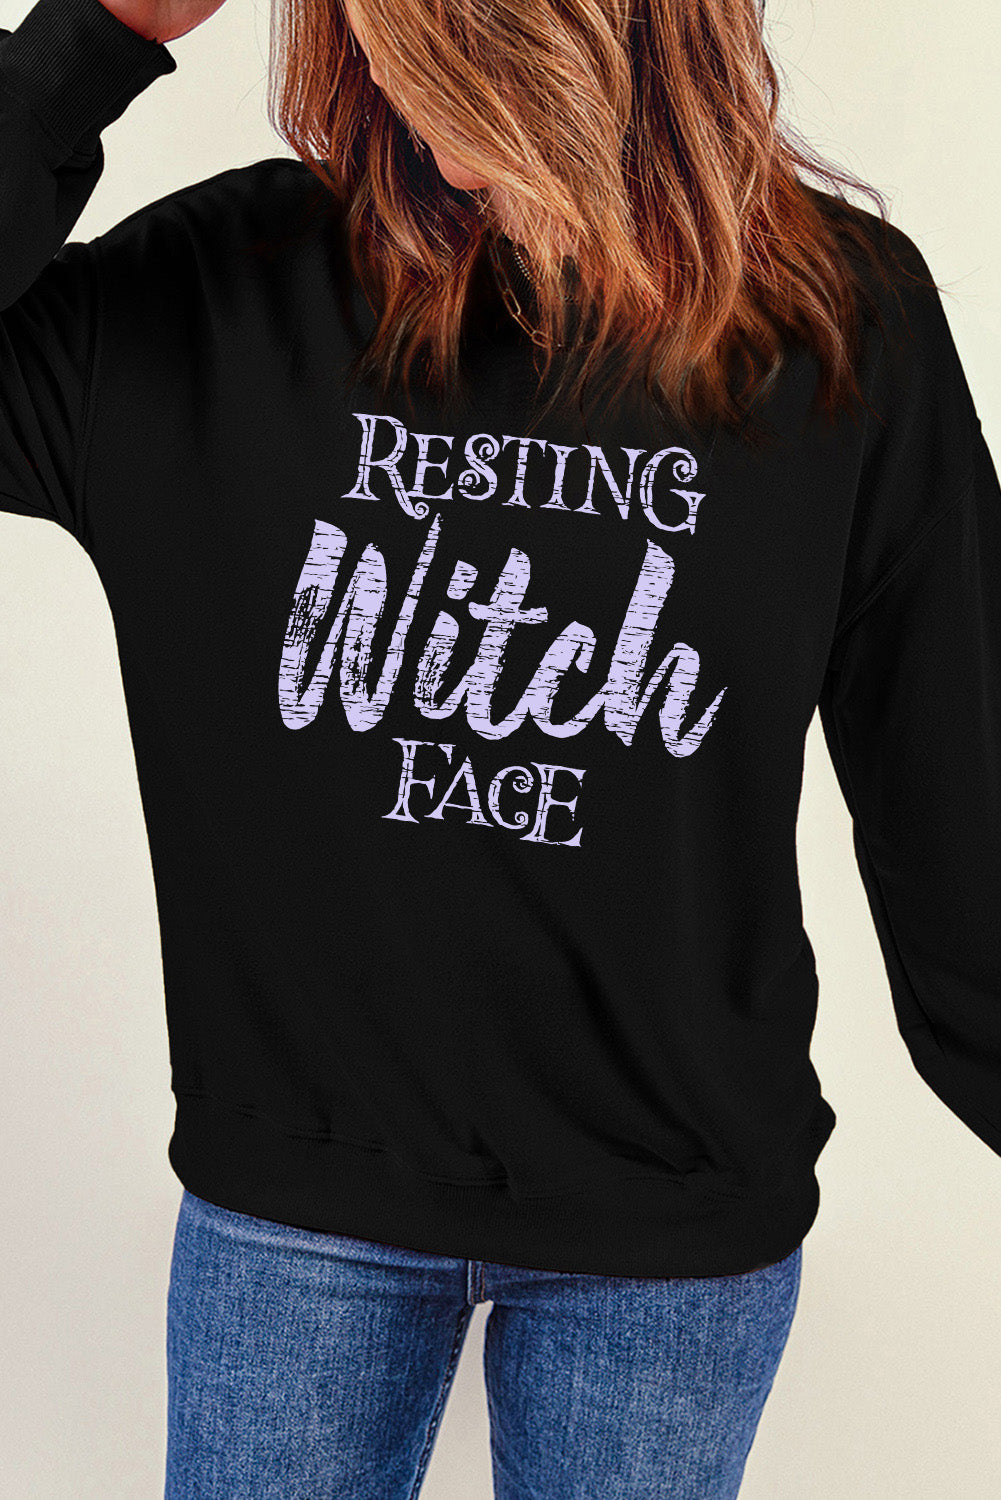 Blue Zone Planet |  Round Neck Long Sleeve RESTING WITCH FACE Graphic Sweatshirt BLUE ZONE PLANET